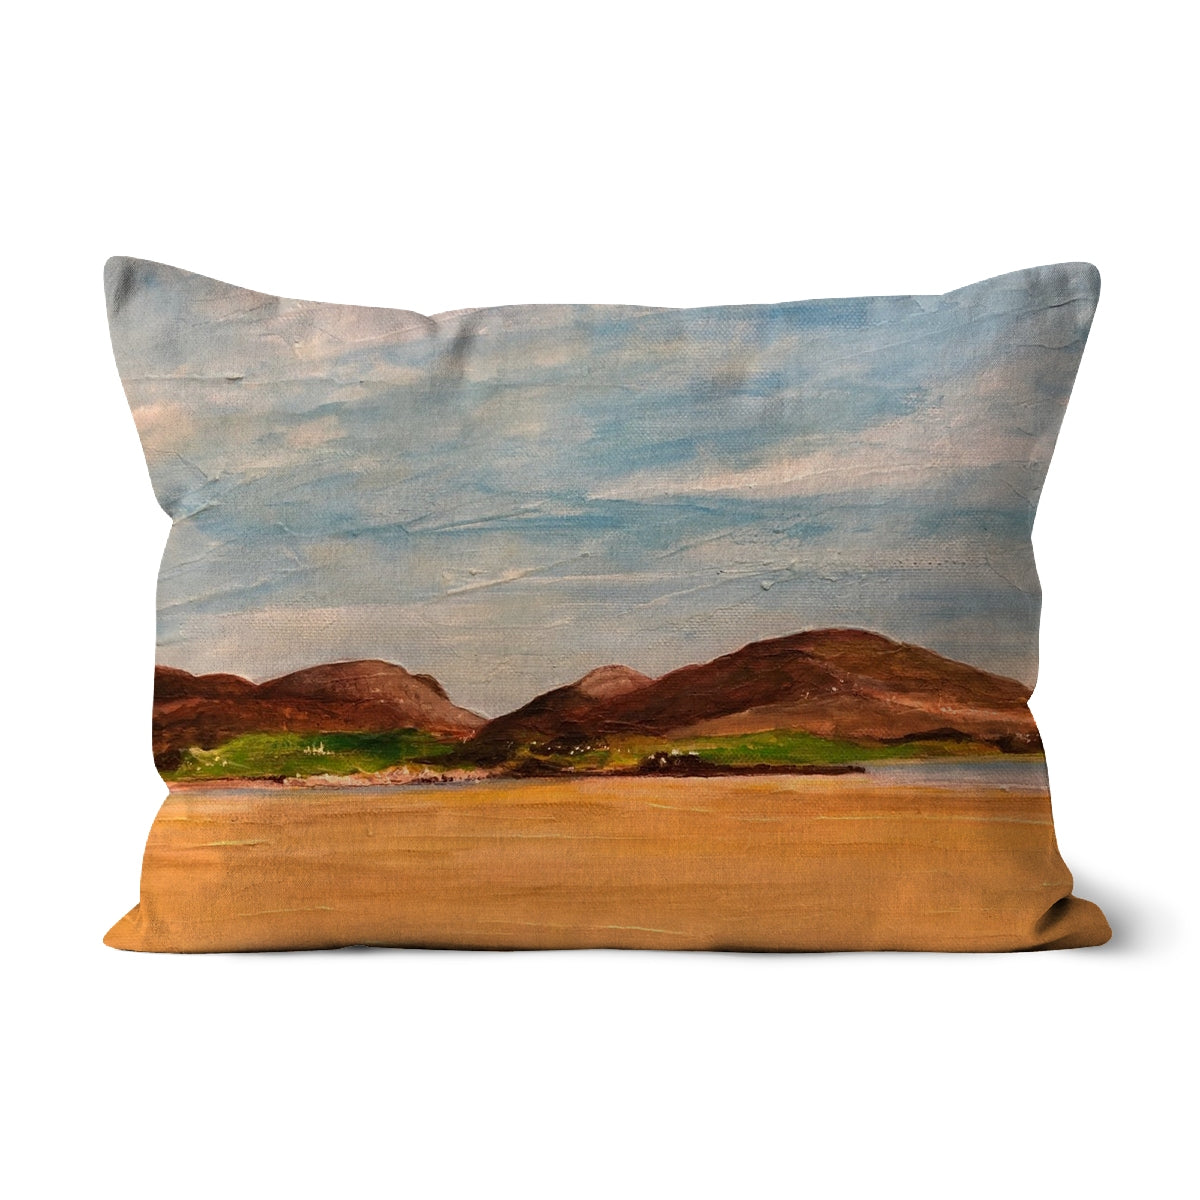 Uig Sands Lewis Art Gifts Cushion-Cushions-Hebridean Islands Art Gallery-Linen-19"x13"-Paintings, Prints, Homeware, Art Gifts From Scotland By Scottish Artist Kevin Hunter